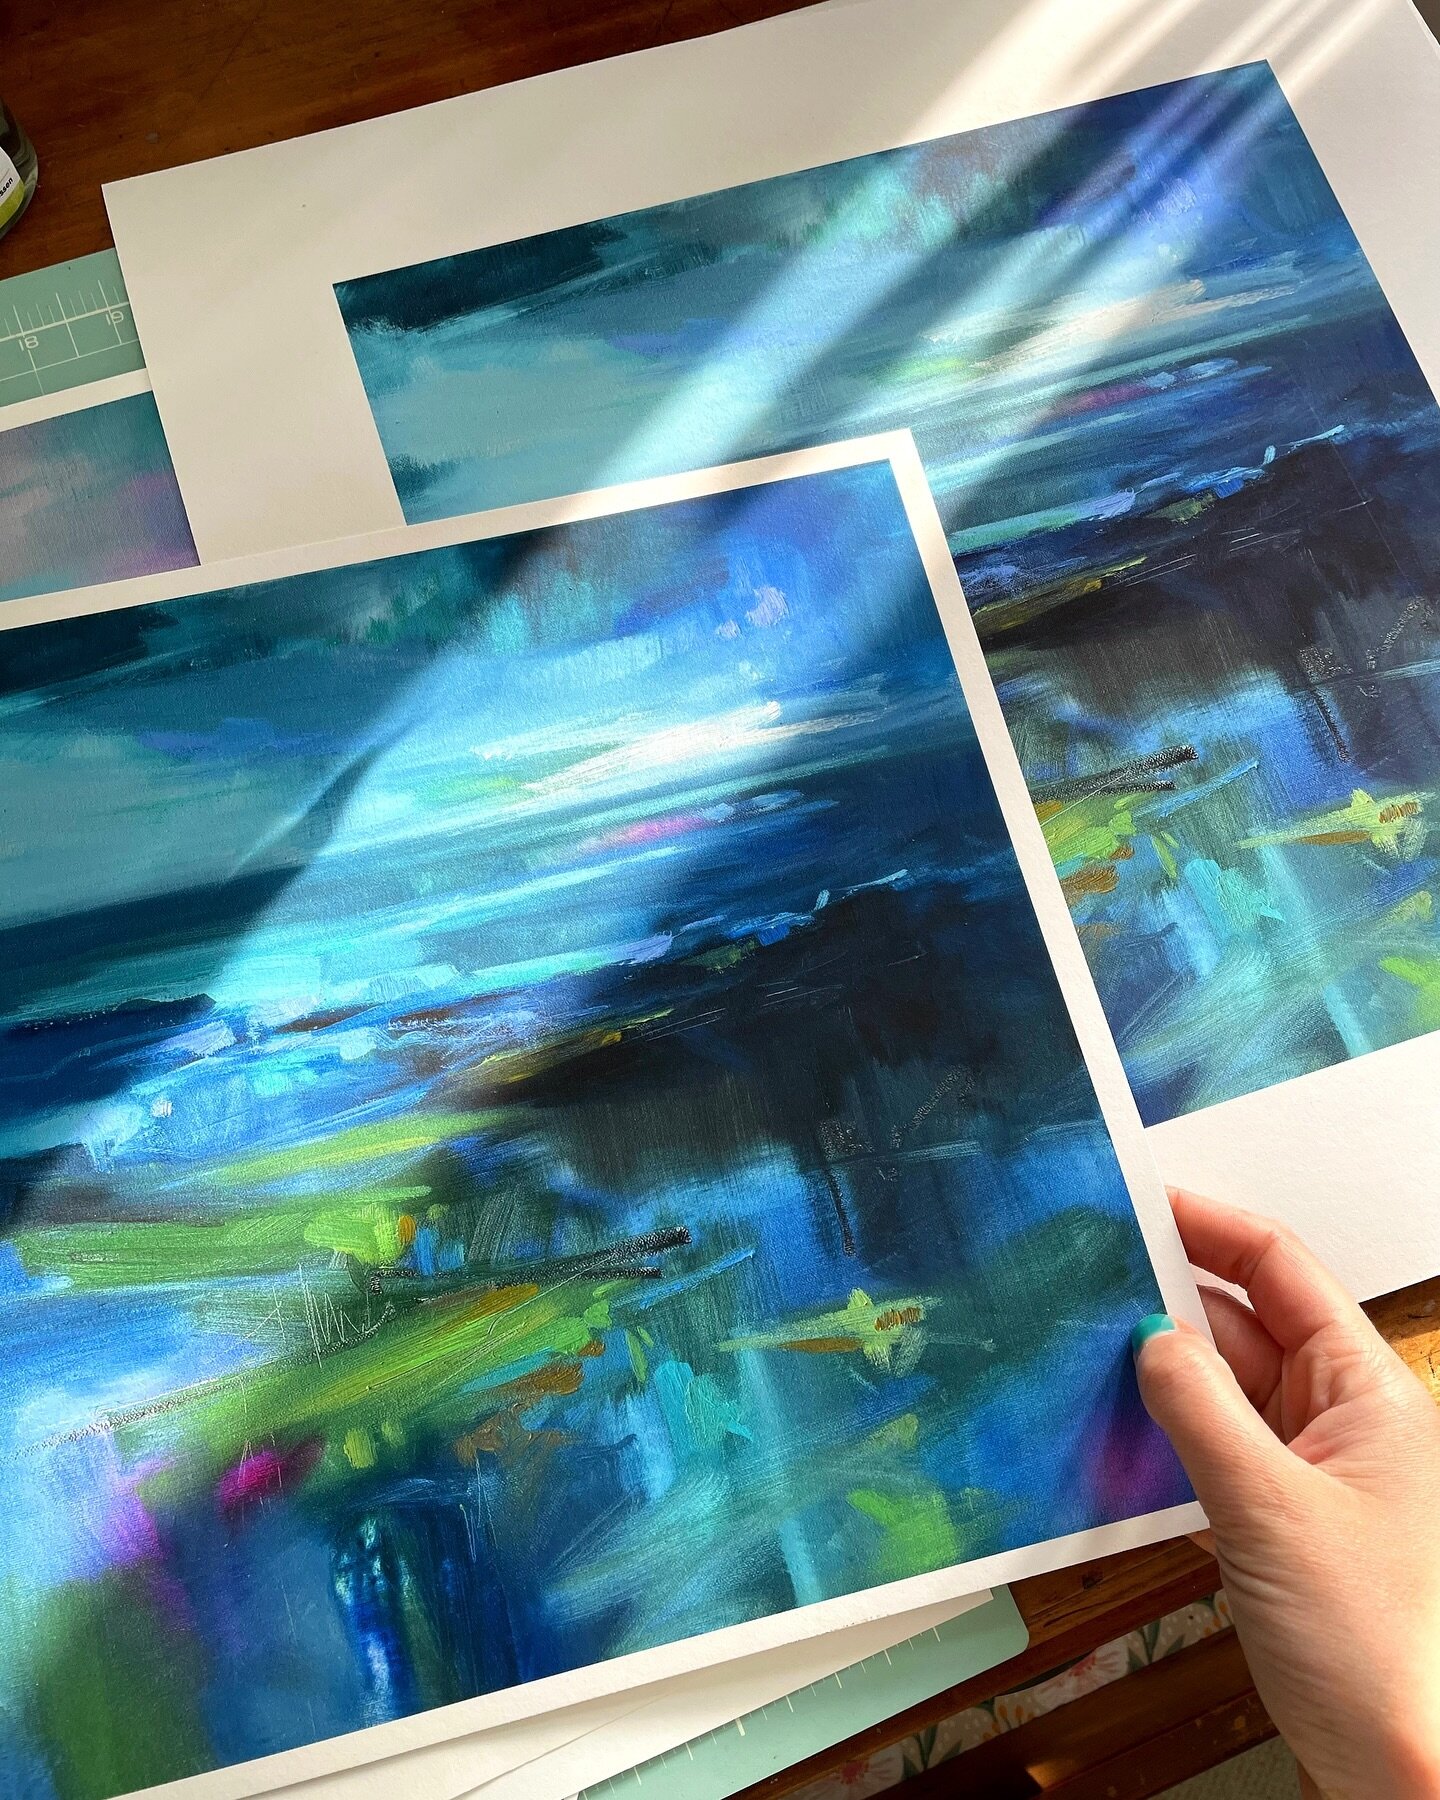 Working away behind the scenes over here. Excited to be bringing you some new prints later this week! 🤩

#scottishlandscapepainting #artprints #contemporarylandscapeart #landscapepainting #scottishart #scottishpainting